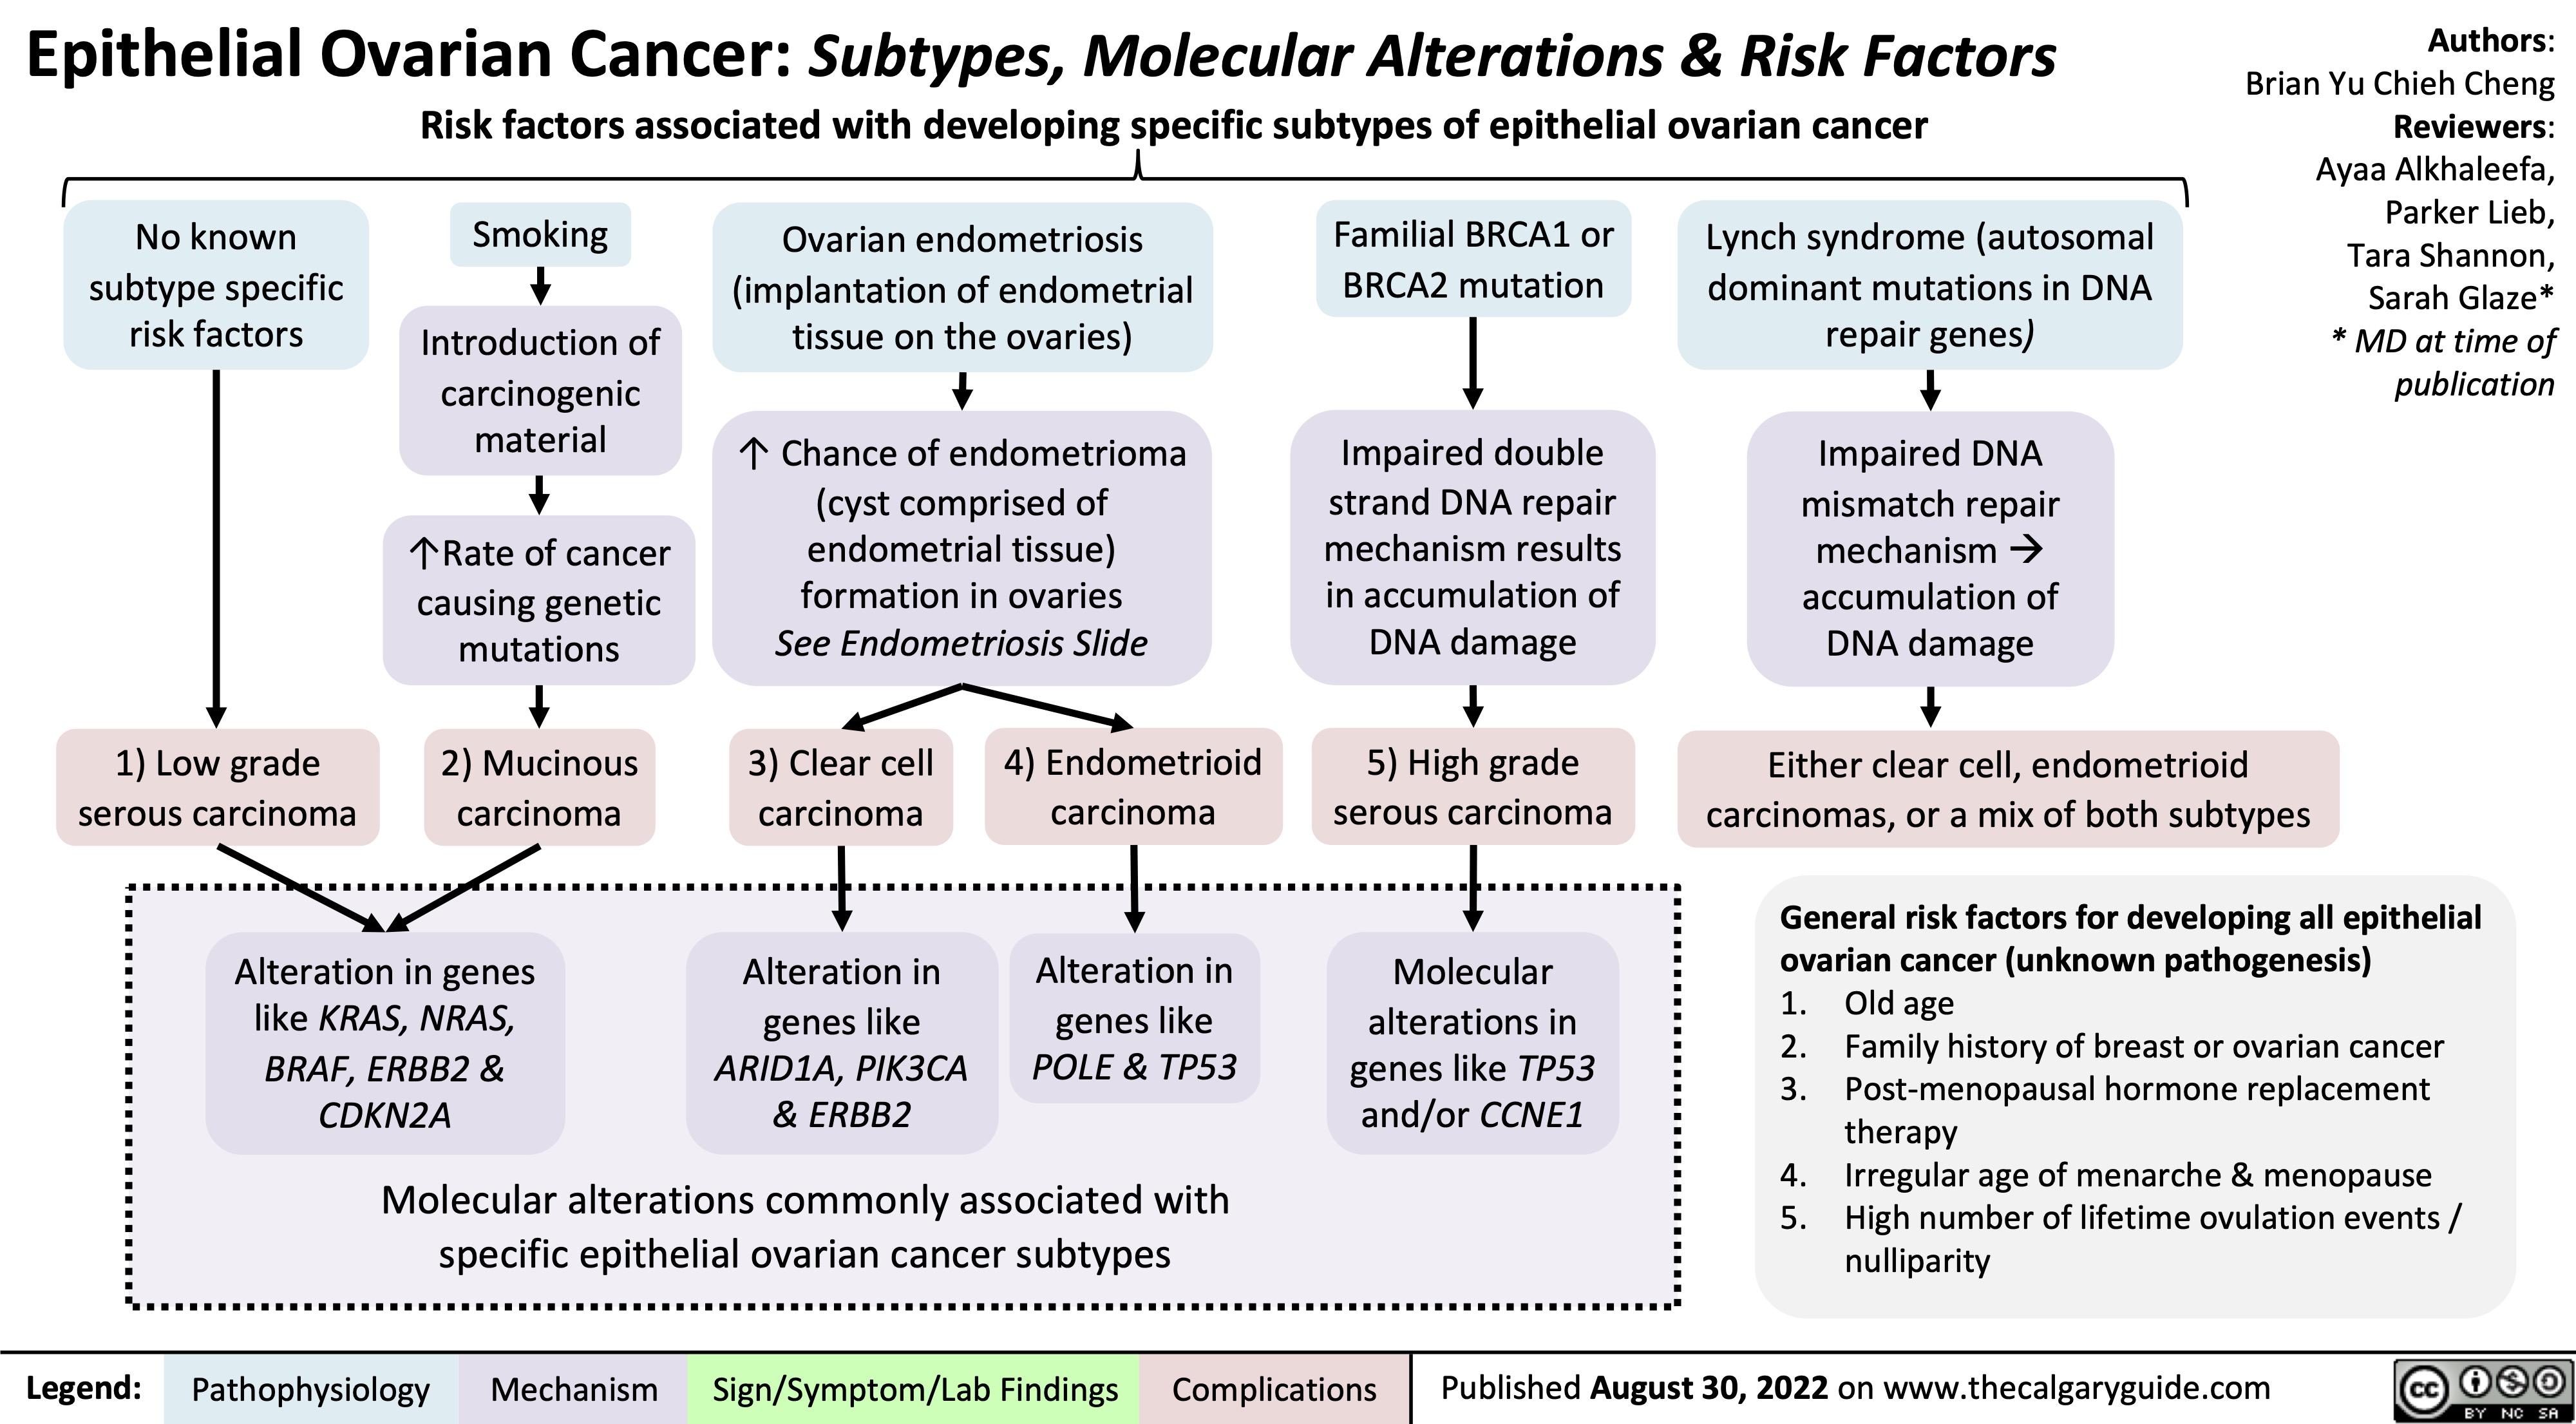 Epithelial Ovarian Cancer: Subtypes, Molecular Alterations & Risk Factors Risk factors associated with developing specific subtypes of epithelial ovarian cancer
Authors: Brian Yu Chieh Cheng Reviewers: Ayaa Alkhaleefa, Parker Lieb, Tara Shannon, Sarah Glaze* * MD at time of publication
      No known subtype specific risk factors
Smoking
Introduction of carcinogenic material
↑Rate of cancer causing genetic mutations
2) Mucinous carcinoma
Ovarian endometriosis (implantation of endometrial tissue on the ovaries)
↑ Chance of endometrioma (cyst comprised of endometrial tissue) formation in ovaries
See Endometriosis Slide
Familial BRCA1 or BRCA2 mutation
Impaired double strand DNA repair mechanism results in accumulation of DNA damage
5) High grade serous carcinoma
Lynch syndrome (autosomal dominant mutations in DNA repair genes)
Impaired DNA mismatch repair
mechanismà accumulation of DNA damage
              1) Low grade serous carcinoma
3) Clear cell carcinoma
4) Endometrioid carcinoma
Either clear cell, endometrioid carcinomas, or a mix of both subtypes
General risk factors for developing all epithelial ovarian cancer (unknown pathogenesis)
1. Old age
2. Family history of breast or ovarian cancer
3. Post-menopausal hormone replacement therapy
4. Irregular age of menarche & menopause 5. High number of lifetime ovulation events /
nulliparity
           Alteration in genes like KRAS, NRAS, BRAF, ERBB2 & CDKN2A
Alteration in genes like ARID1A, PIK3CA & ERBB2
Alteration in genes like POLE & TP53
Molecular alterations in genes like TP53 and/or CCNE1
Molecular alterations commonly associated with specific epithelial ovarian cancer subtypes
 Legend:
 Pathophysiology
Mechanism
Sign/Symptom/Lab Findings
  Complications
 Published August 30, 2022 on www.thecalgaryguide.com
   